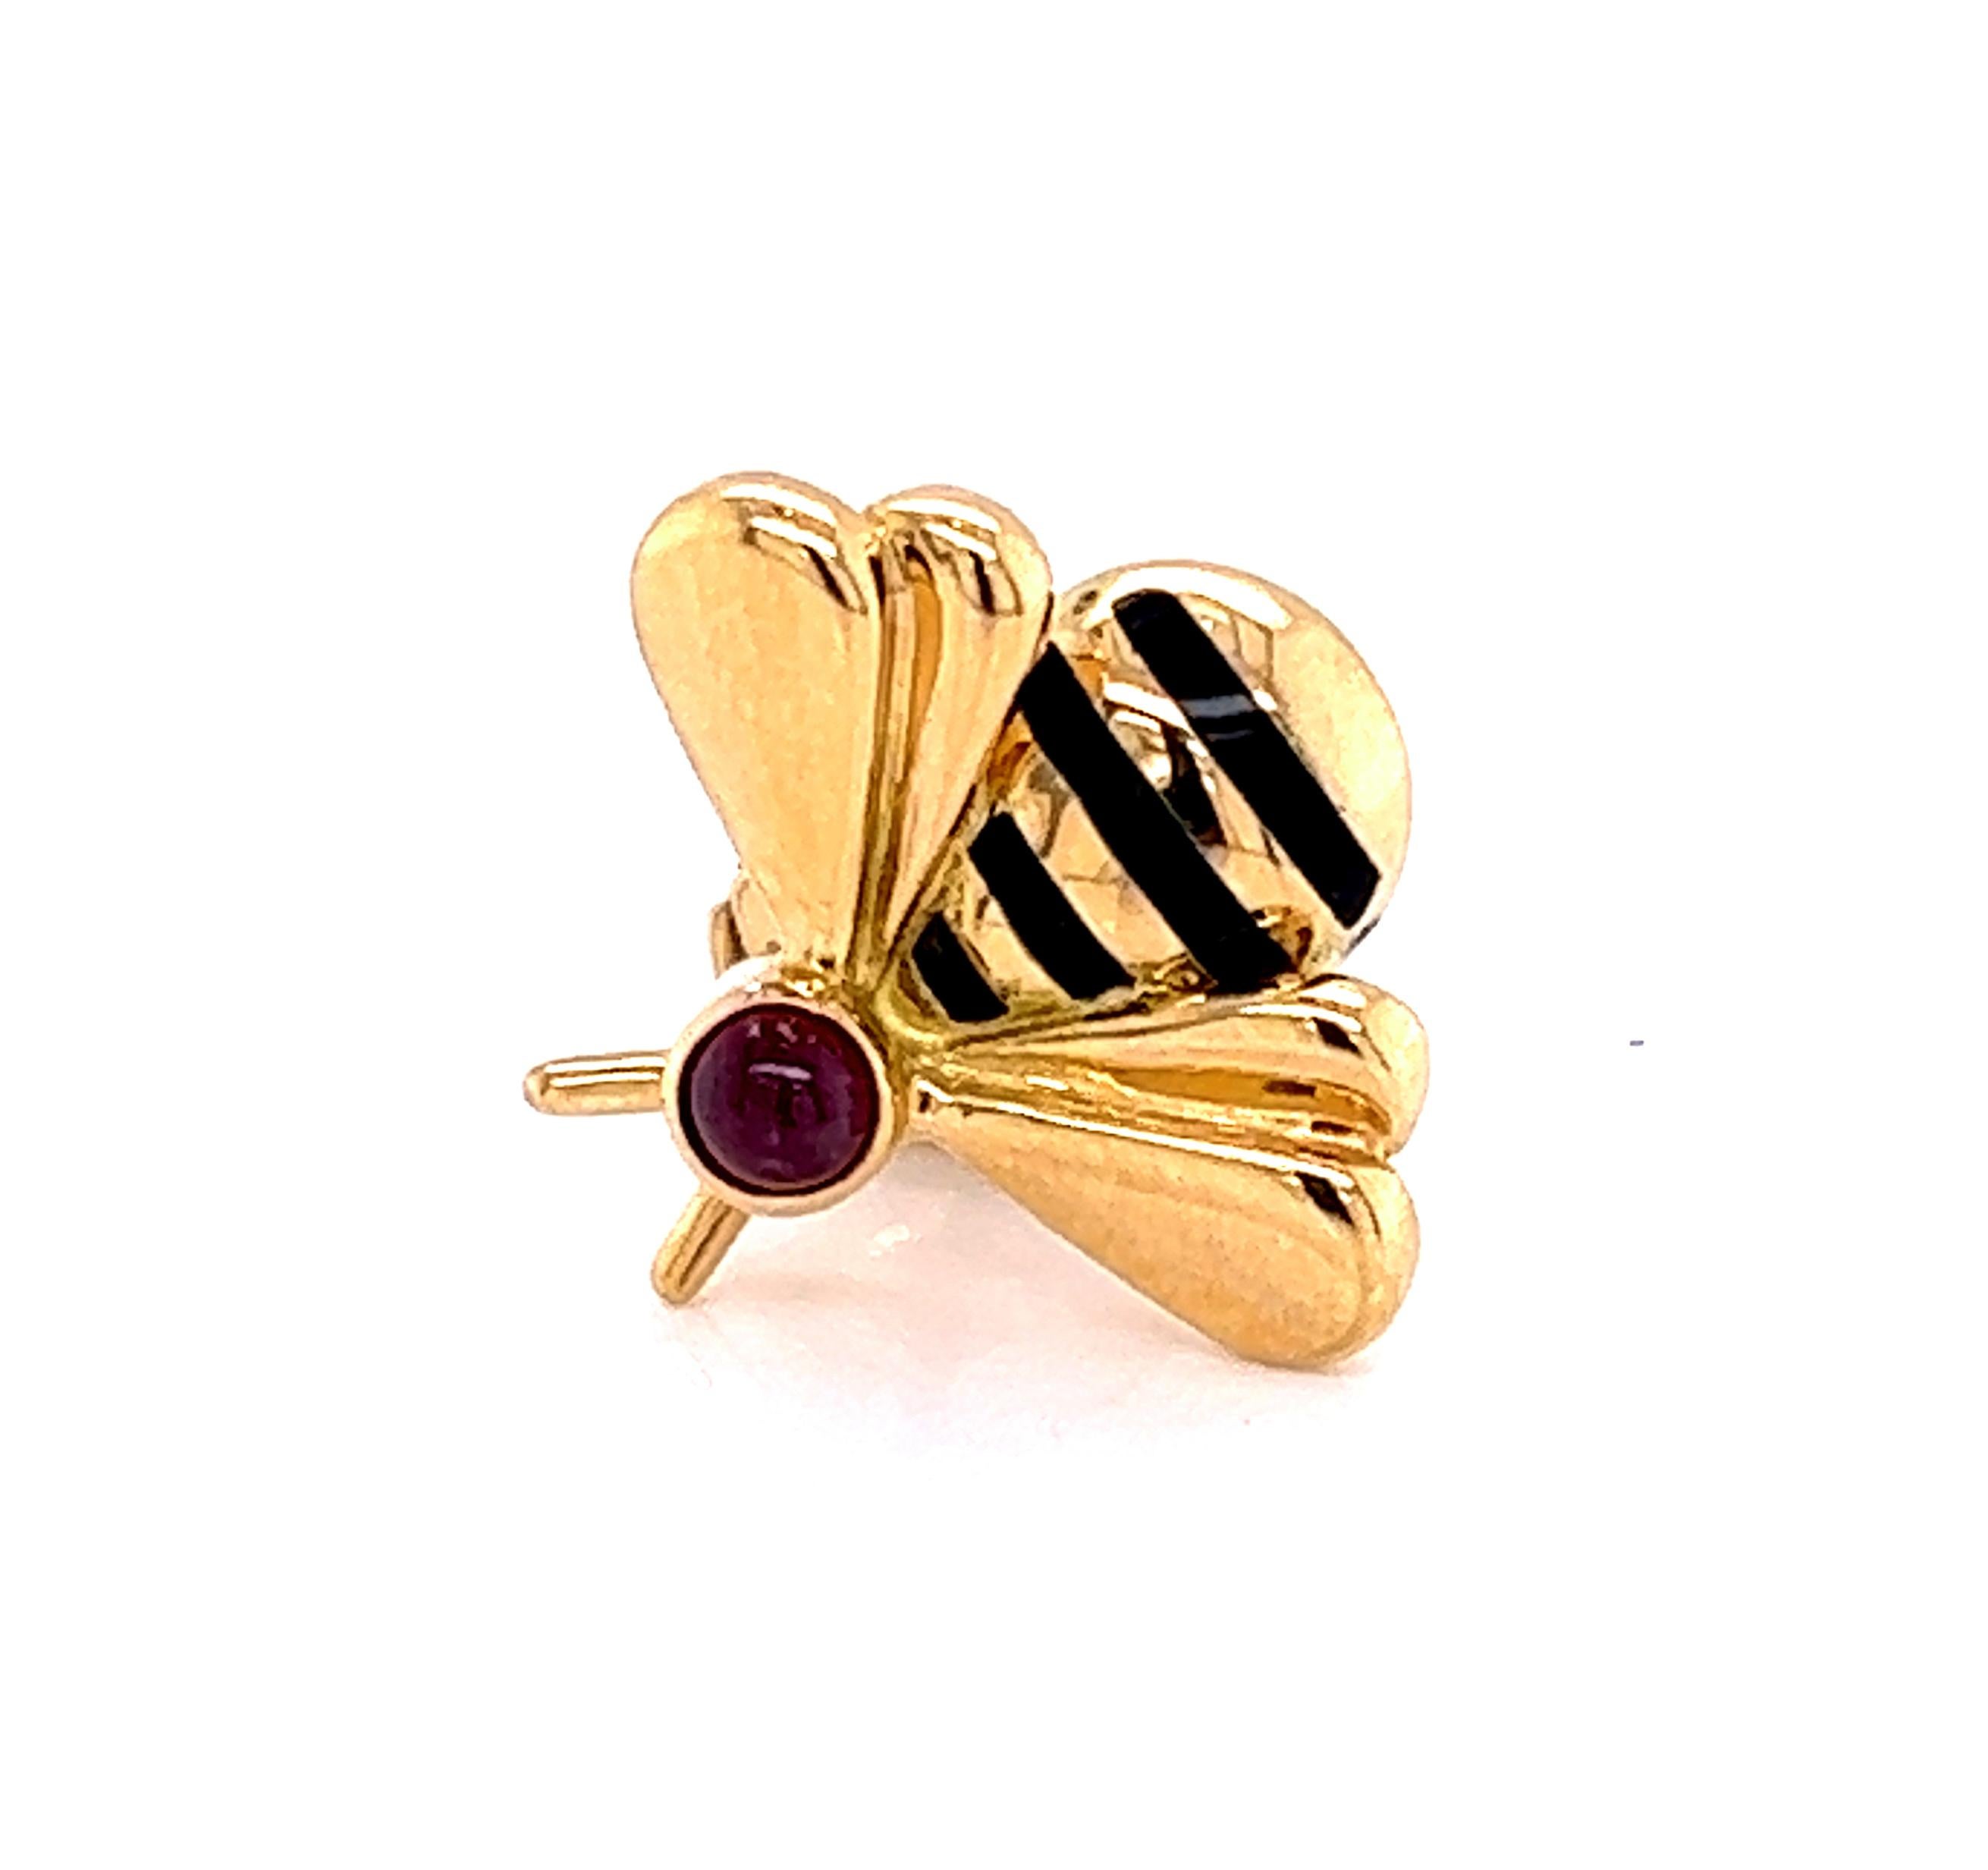 This adorable authentic tack pin is by Cartier, it is crafted from 18k yellow gold featuring a cute bumble bee with a cabochon ruby on the head and black enamel stripes with gold on the body with polished double wings. The pin comes with a post and